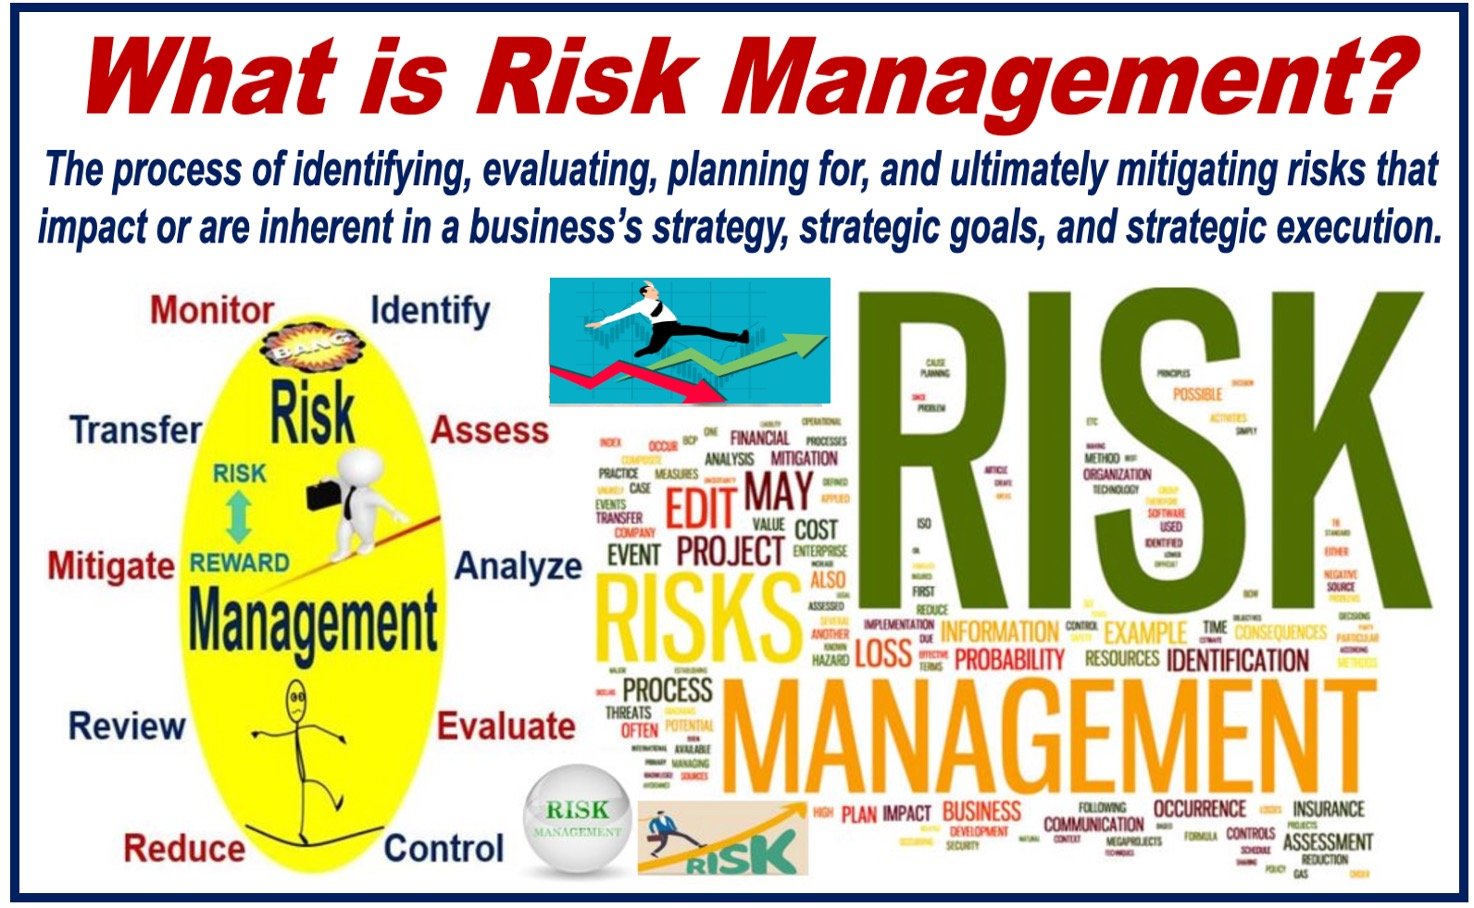 Image with definition of risk management